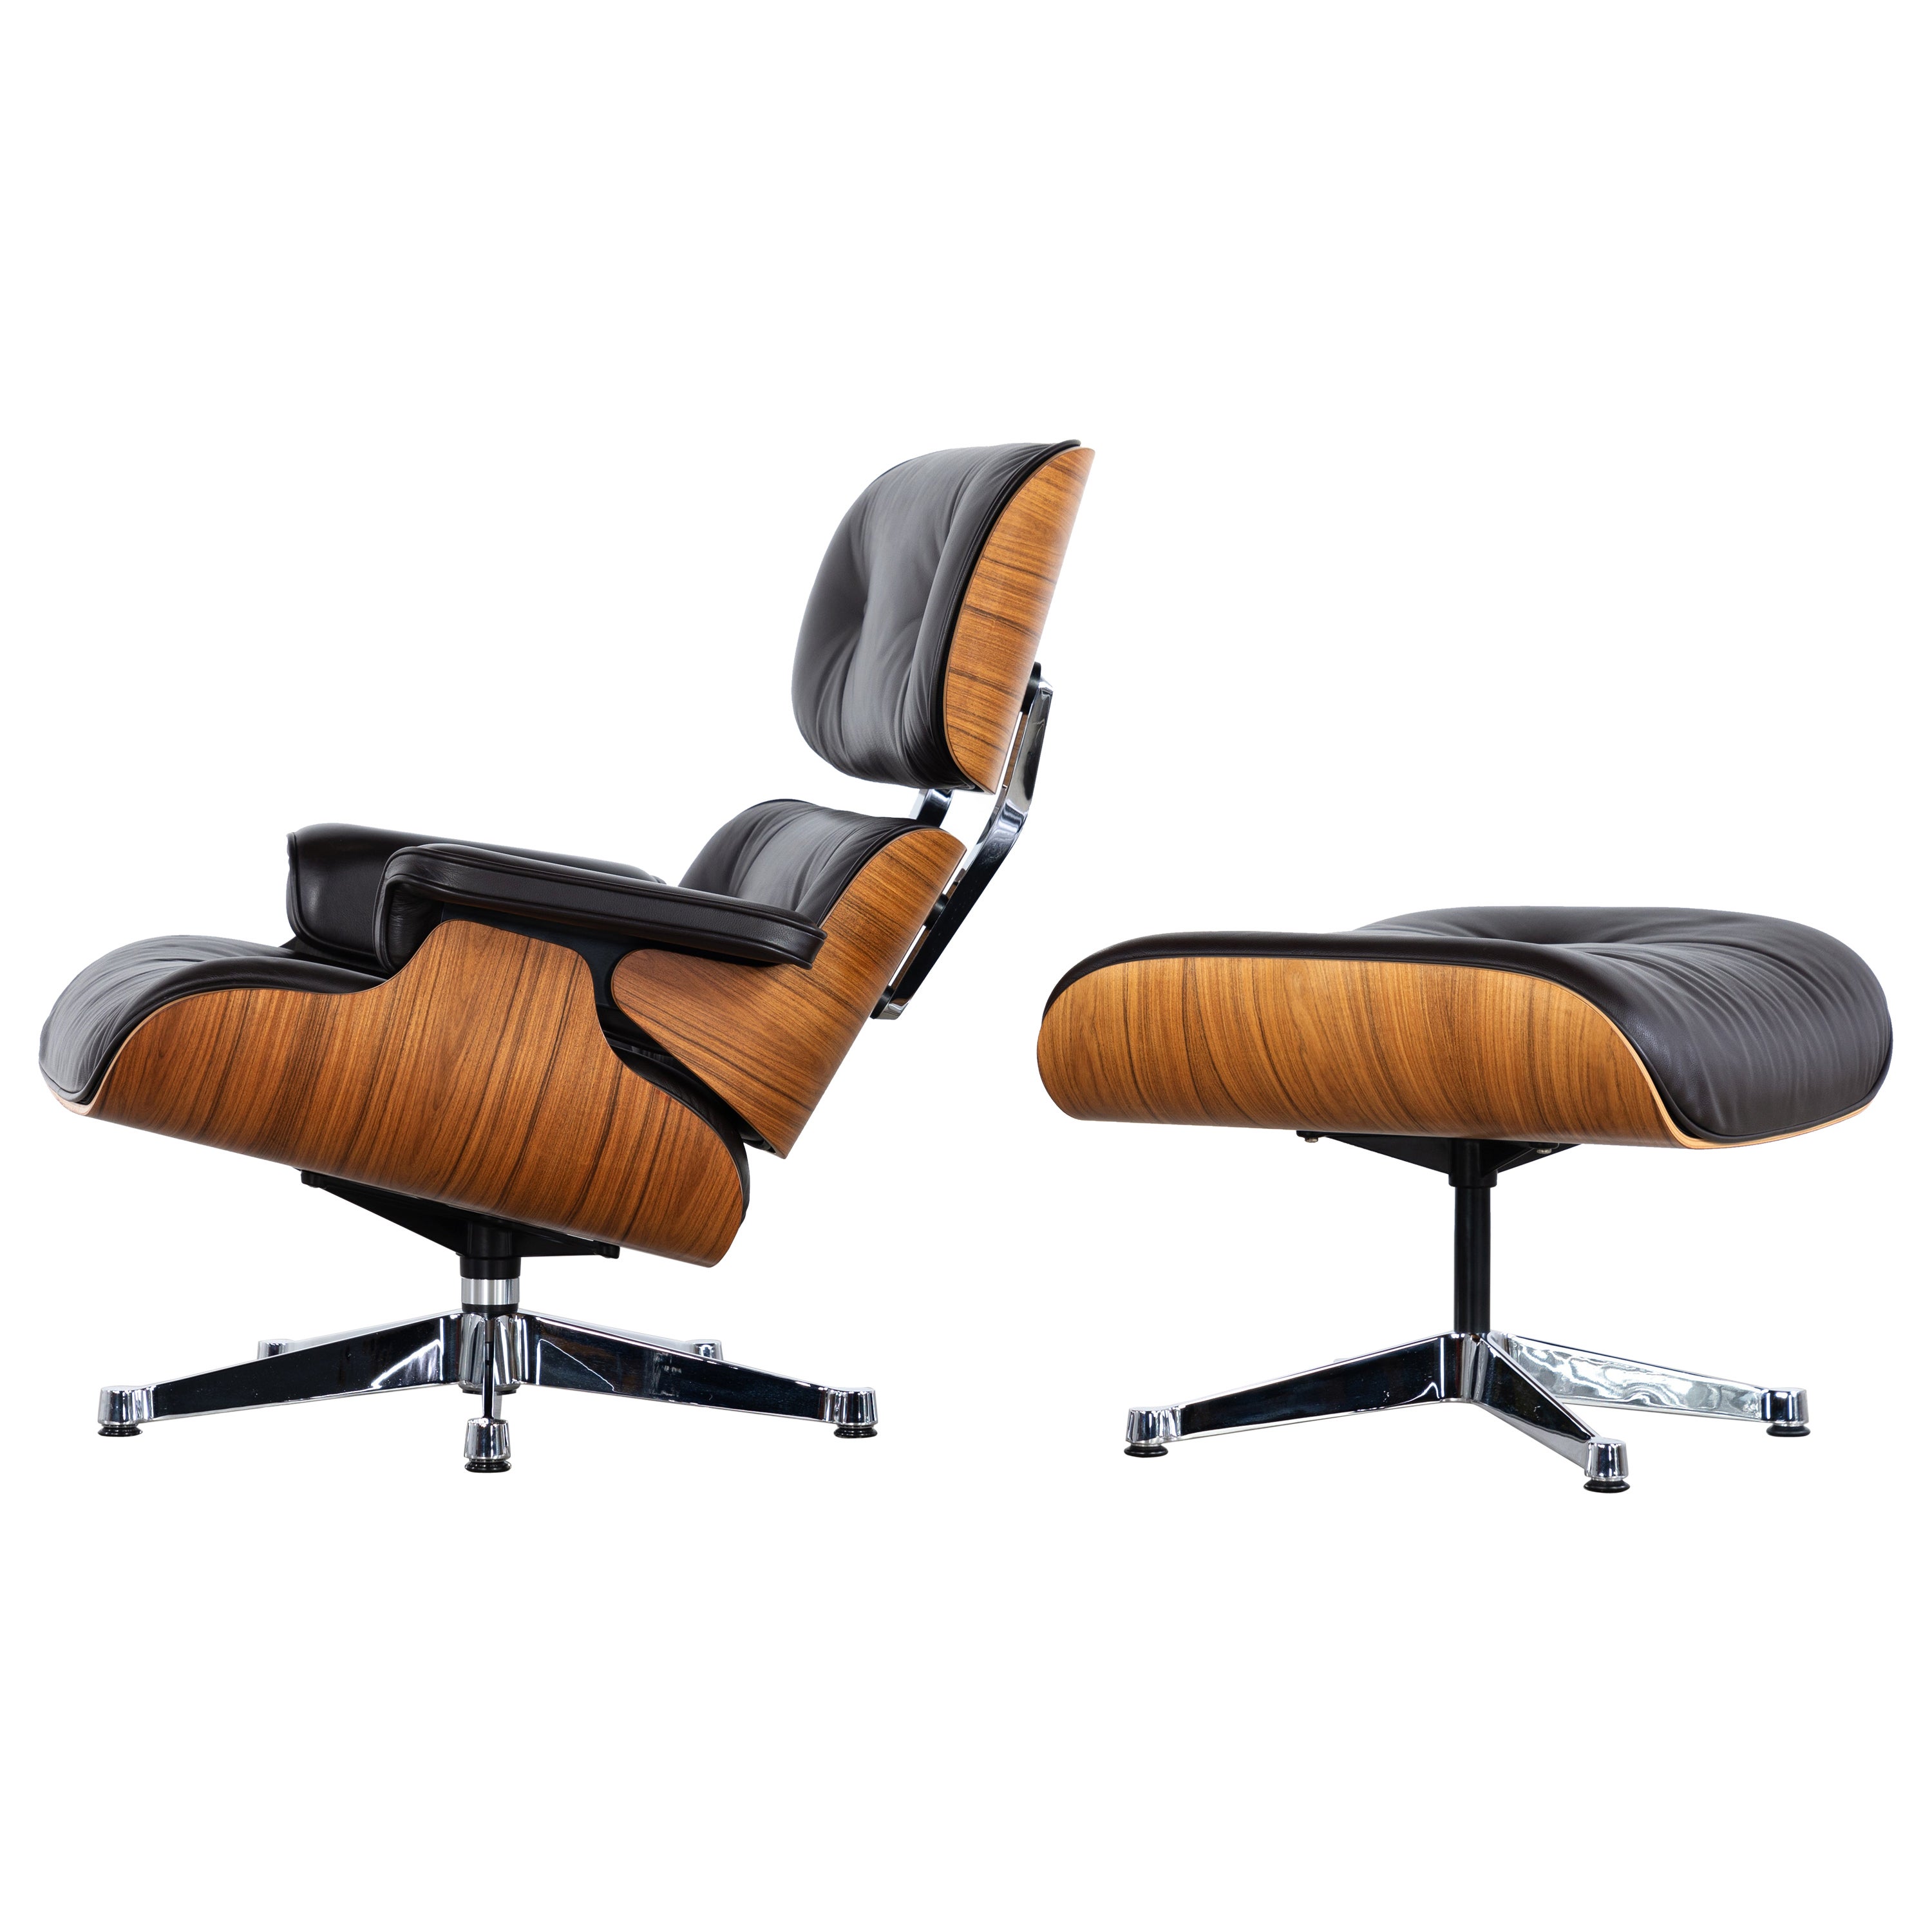 Charles Ray Eames Lounge Chair Ottoman Vitra certified Rosewood Chrome Leather